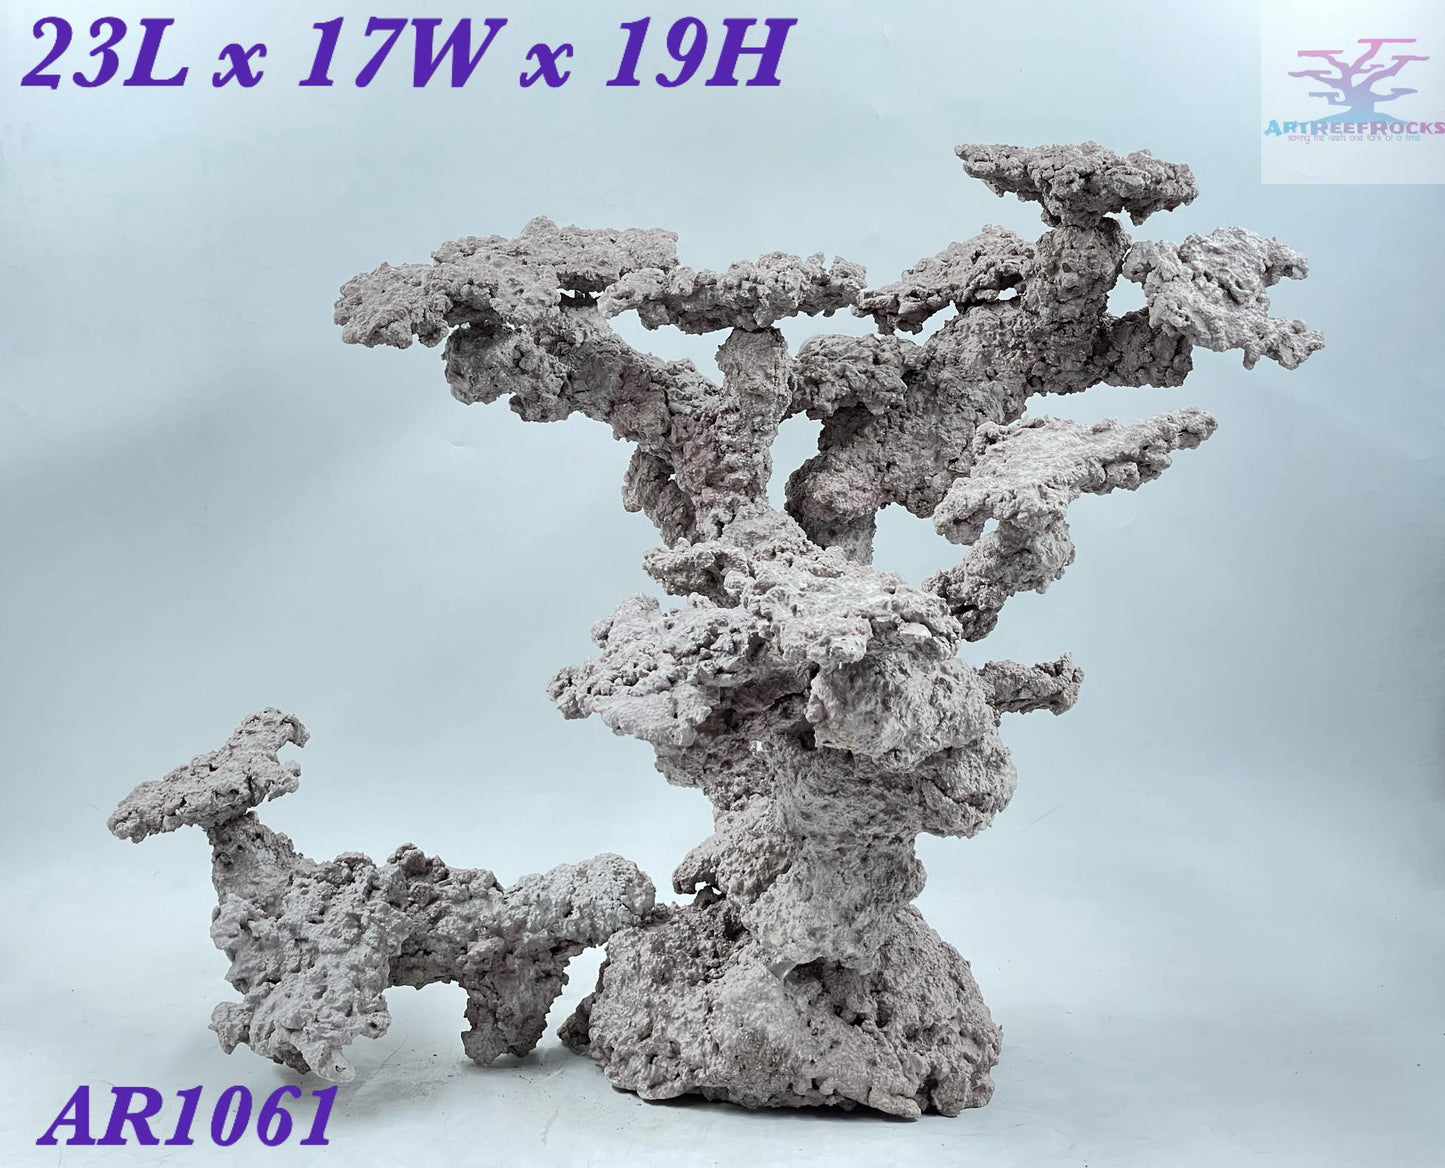 Sold Extra Large Art Reef Rock Structure WYSIWYG